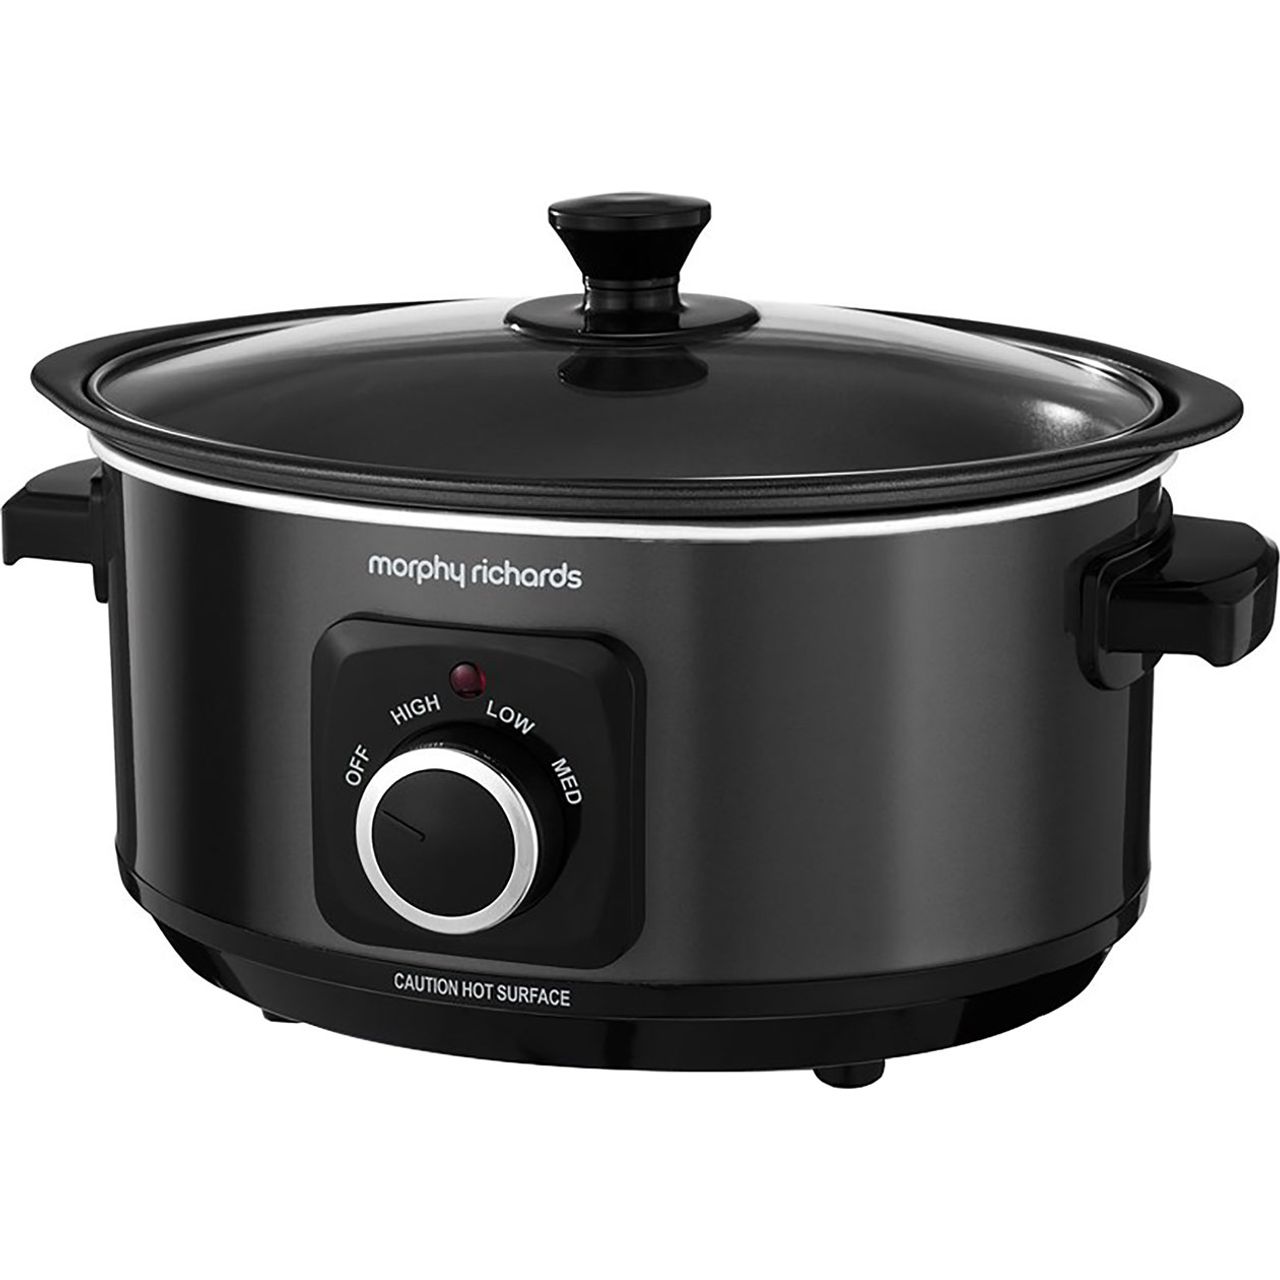 Morphy Richards Evoke Sear And Stew 460012 3.5 Litre Slow Cooker Review